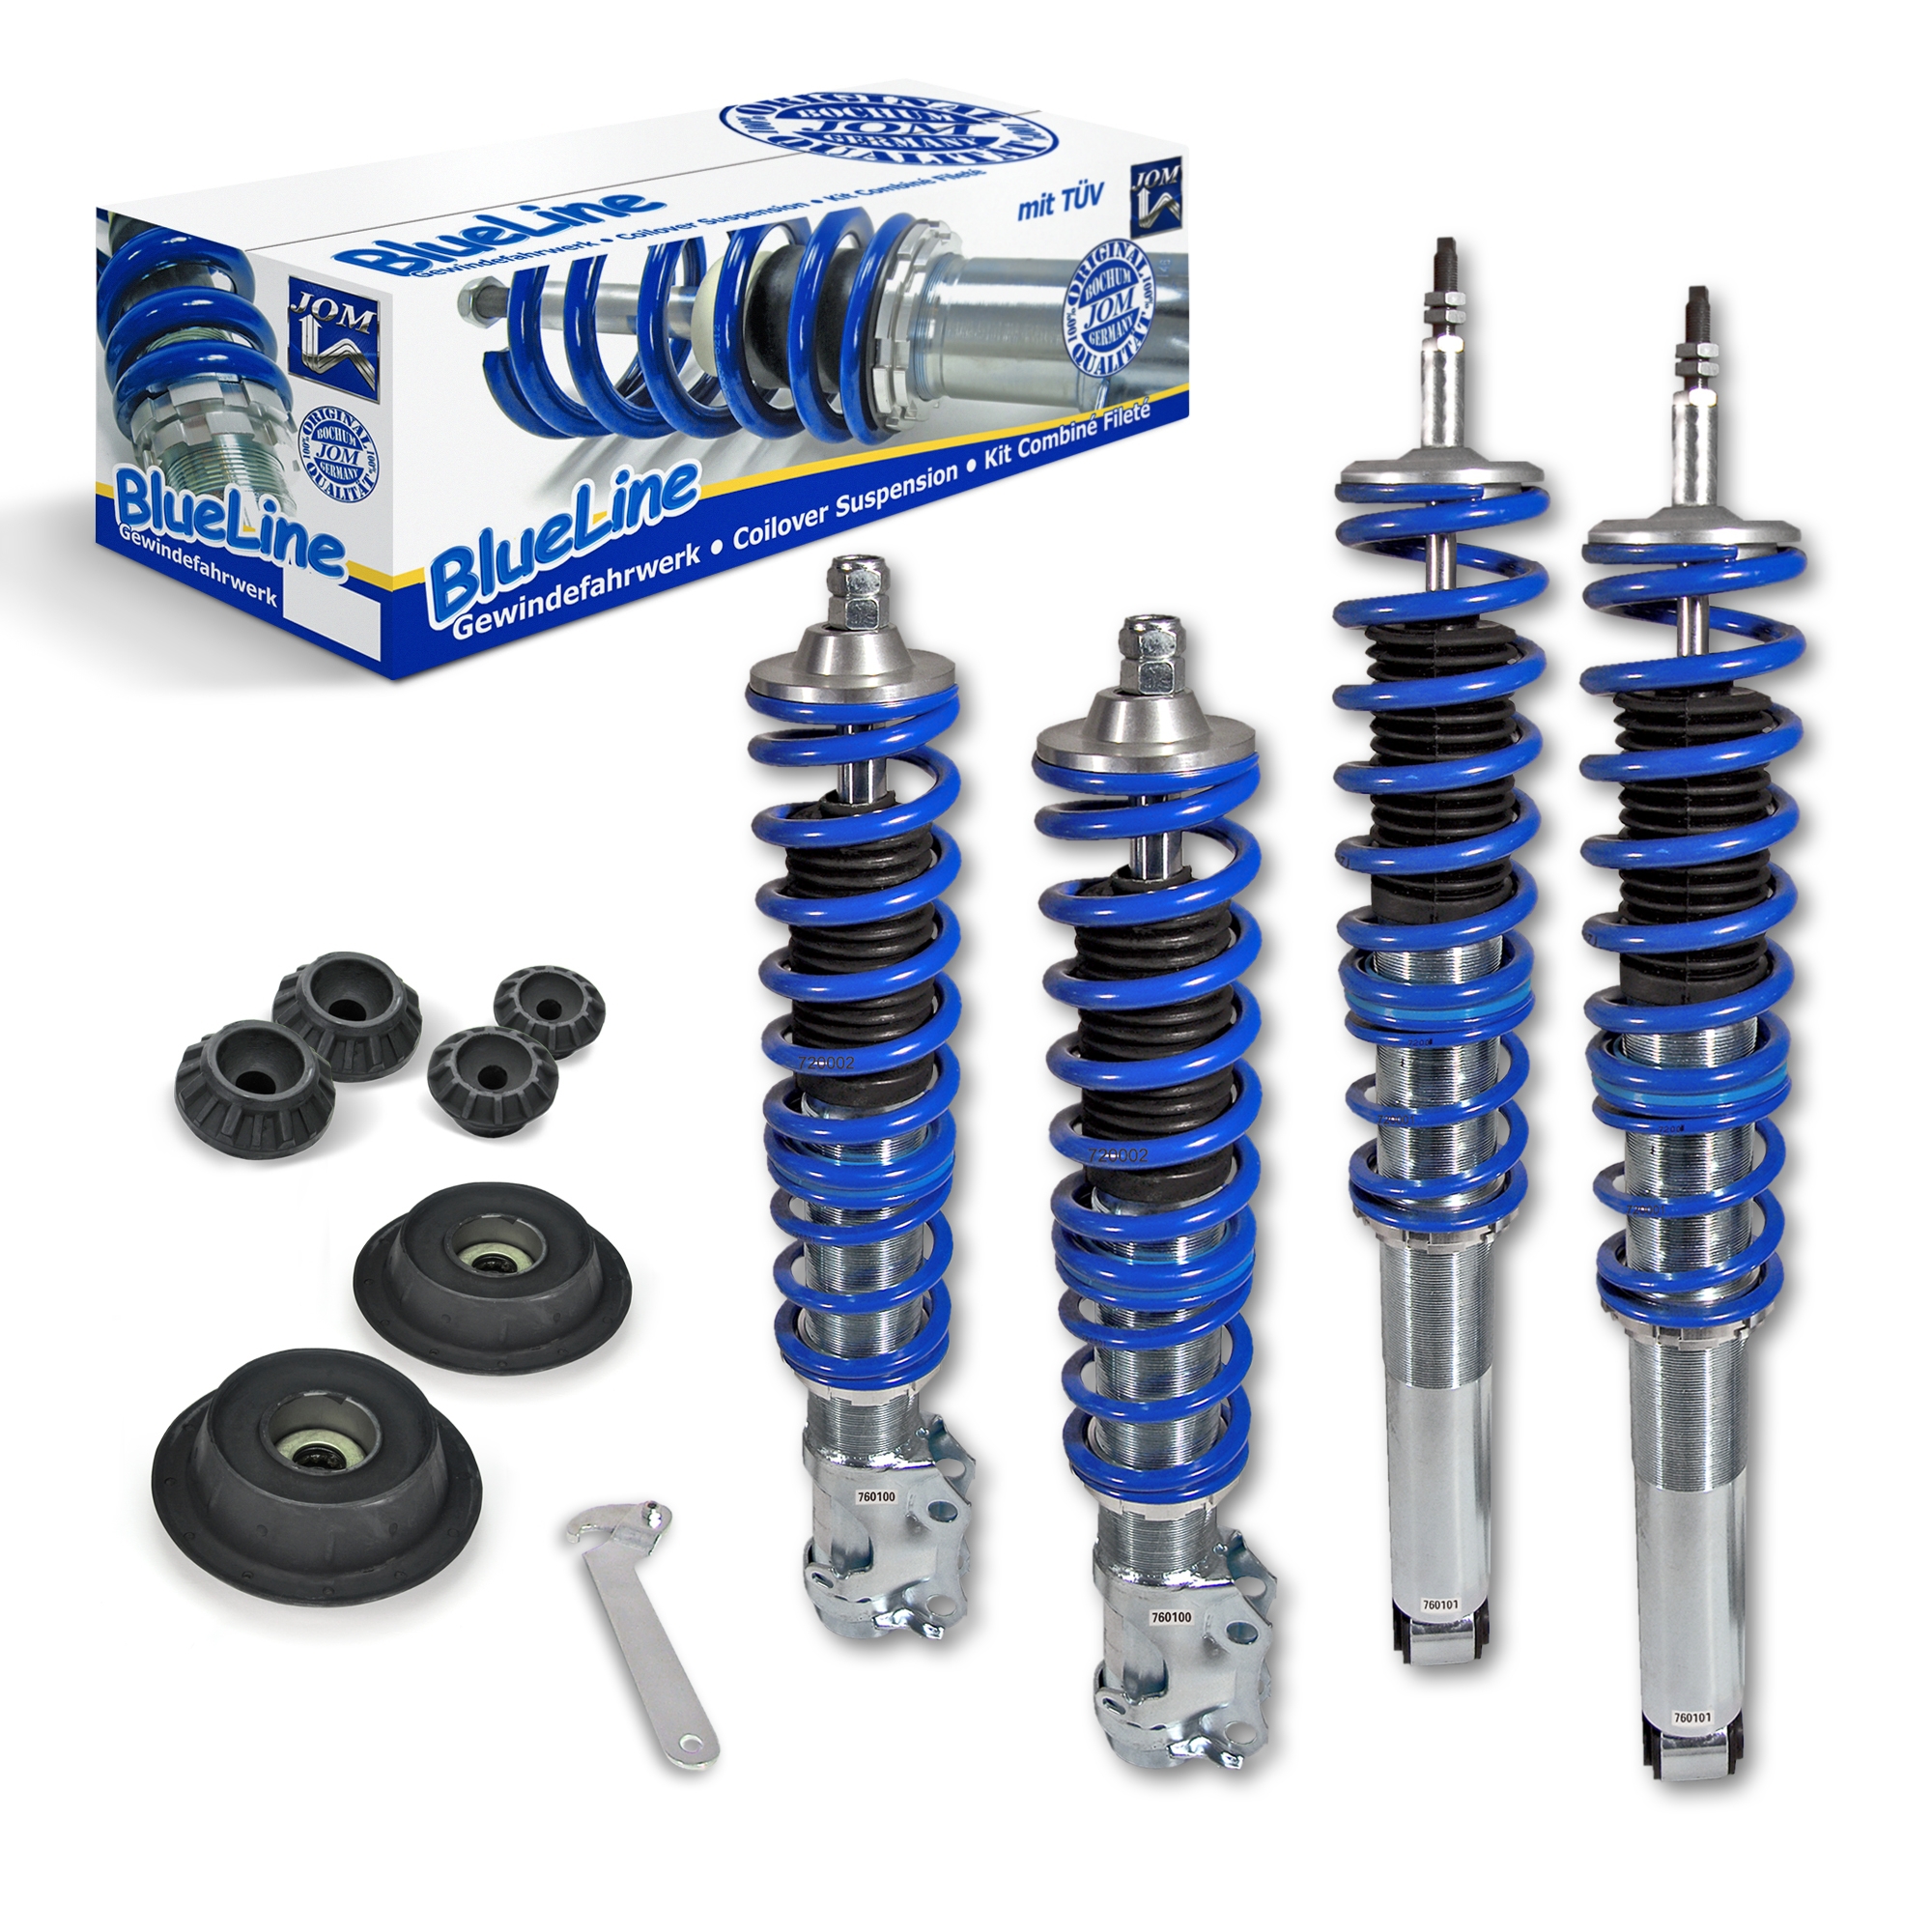 Blueline Coilover Kit With Domcap Set Suitable For Vw Golf 3 Vento Year 10 91 9 97 1hxo And Golf 3 Cabrio 1exo Except Models With Four Wheel